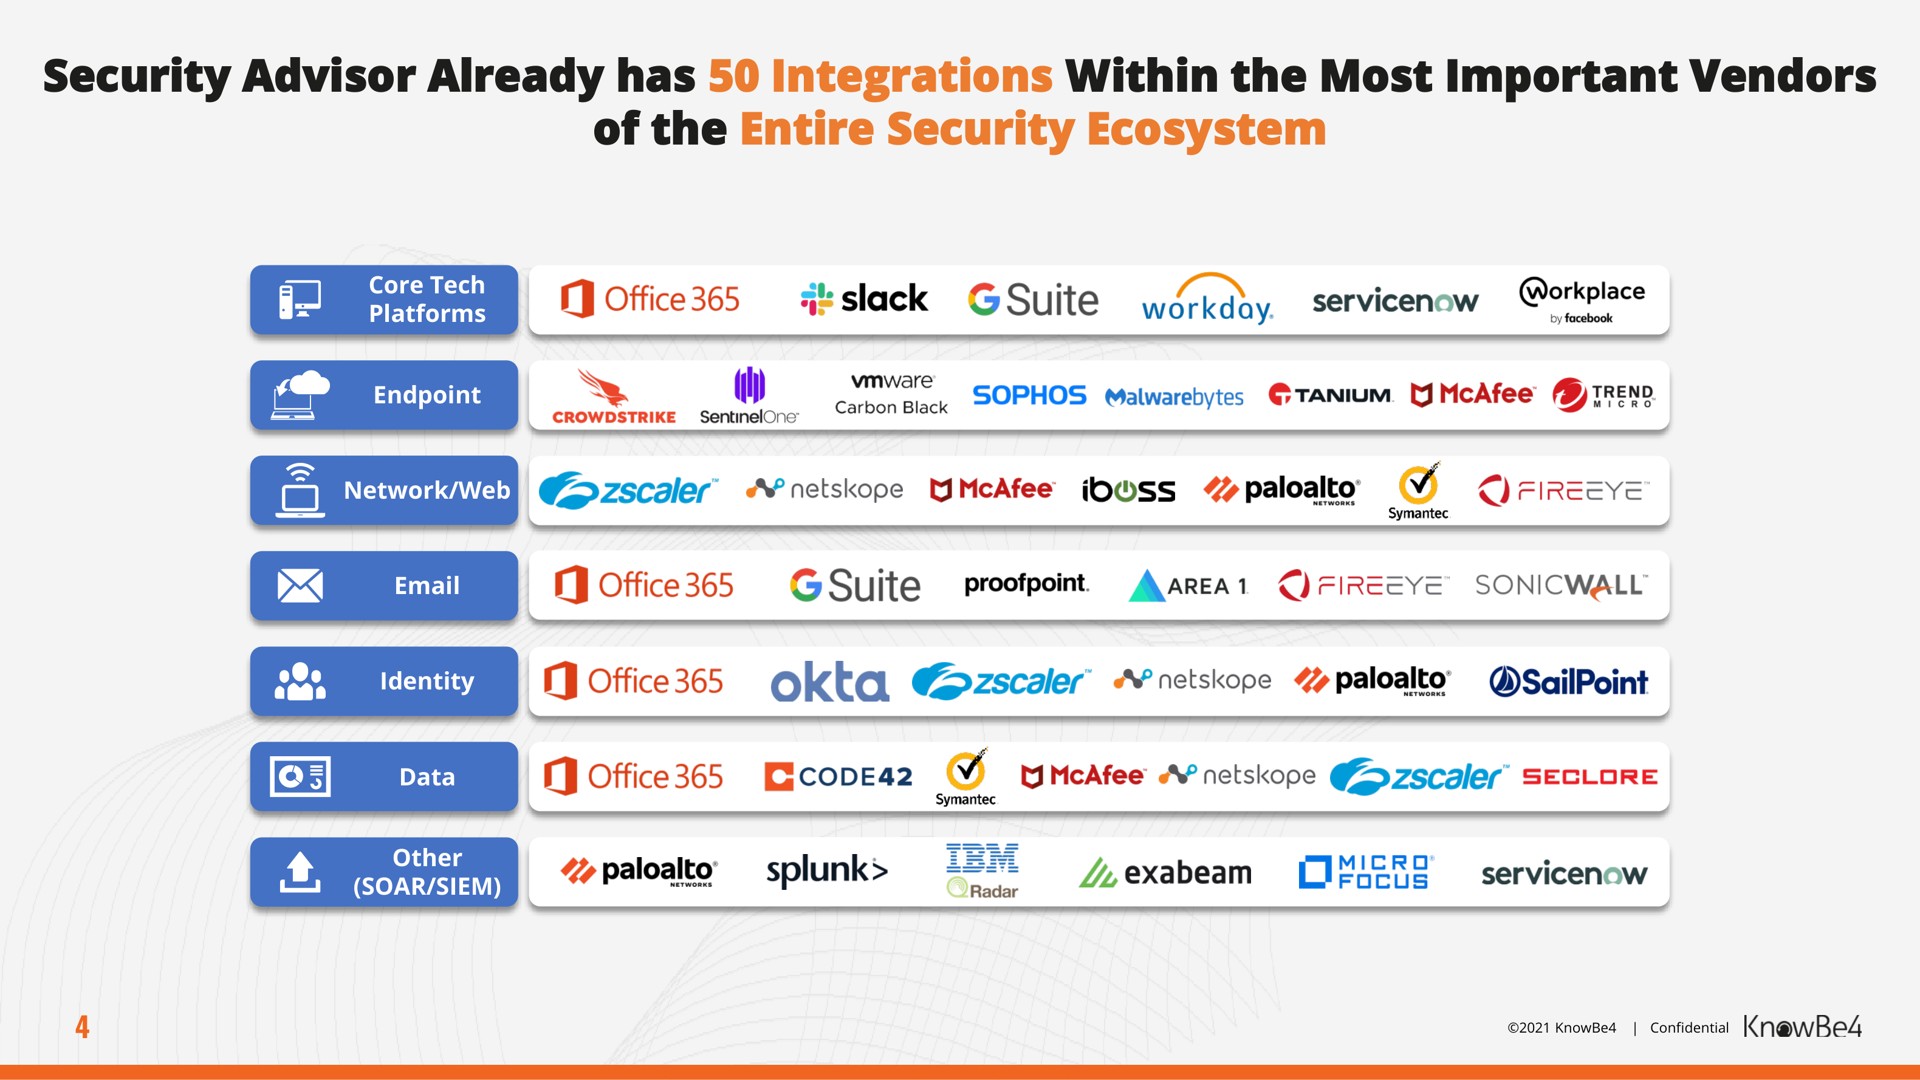 security advisor already has integrations within the most important vendors of the entire security ecosystem | KnowBe4